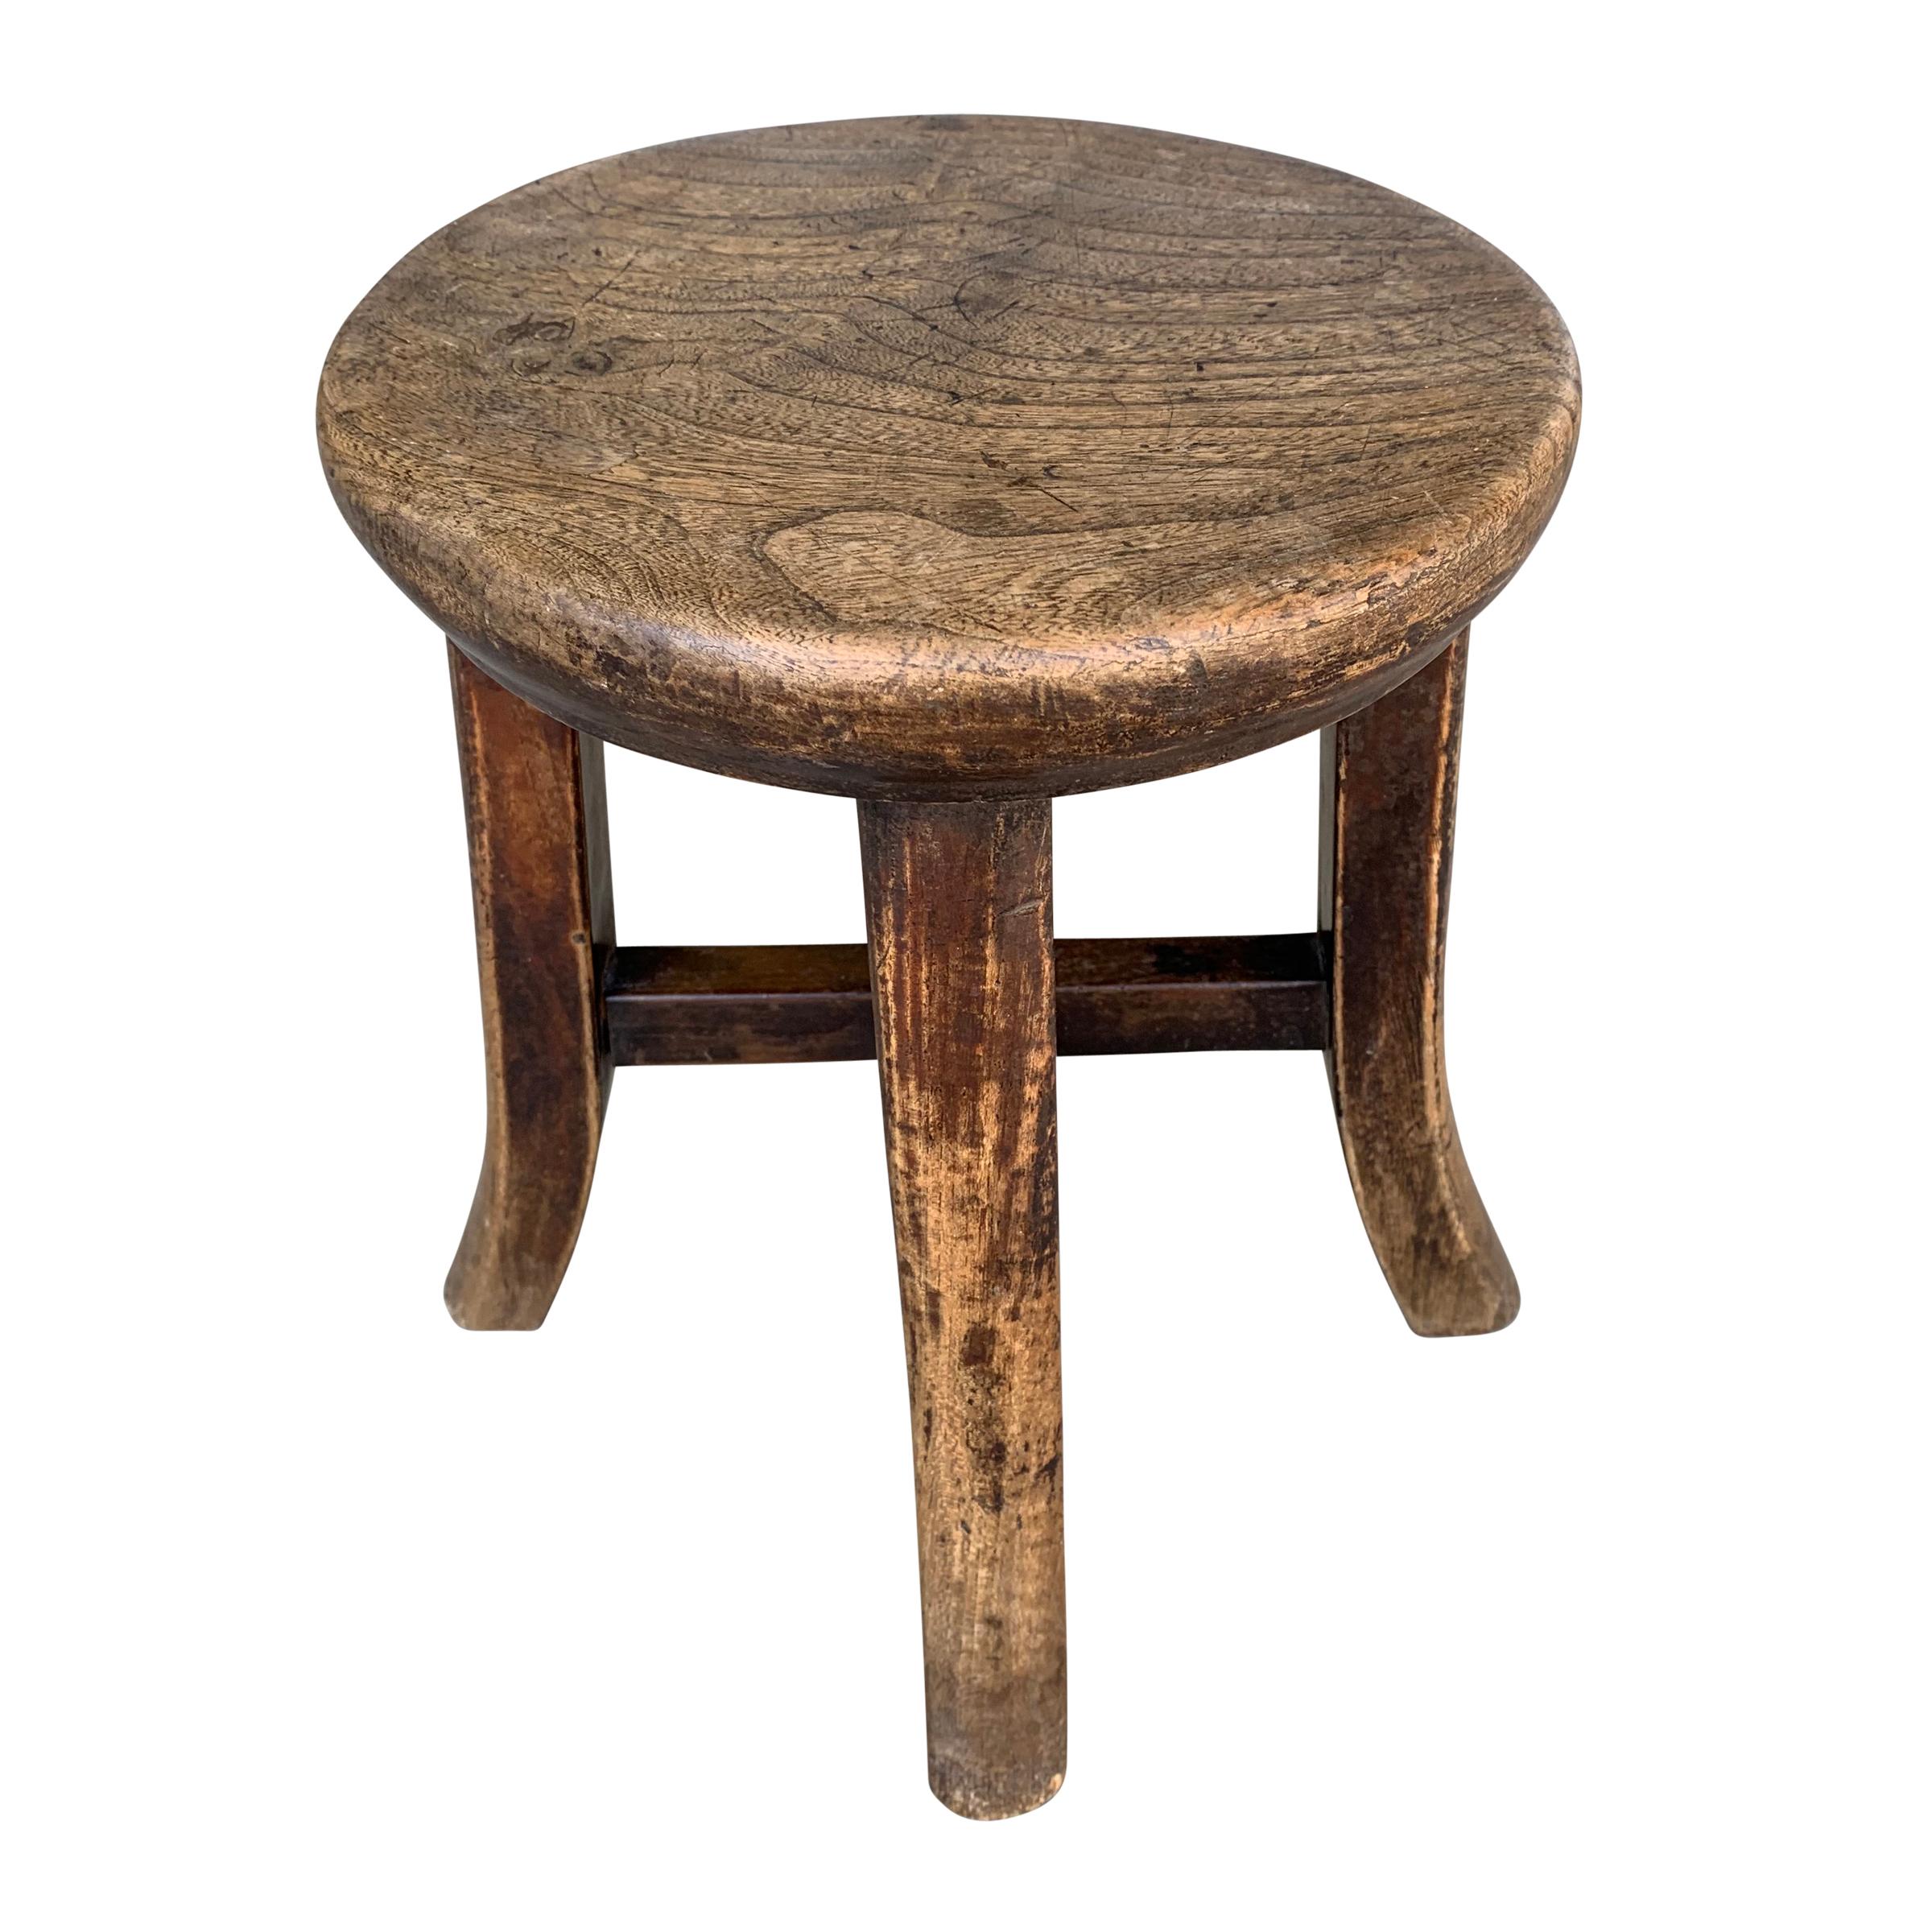 Country Early 20th Century Petite Chinese Stool